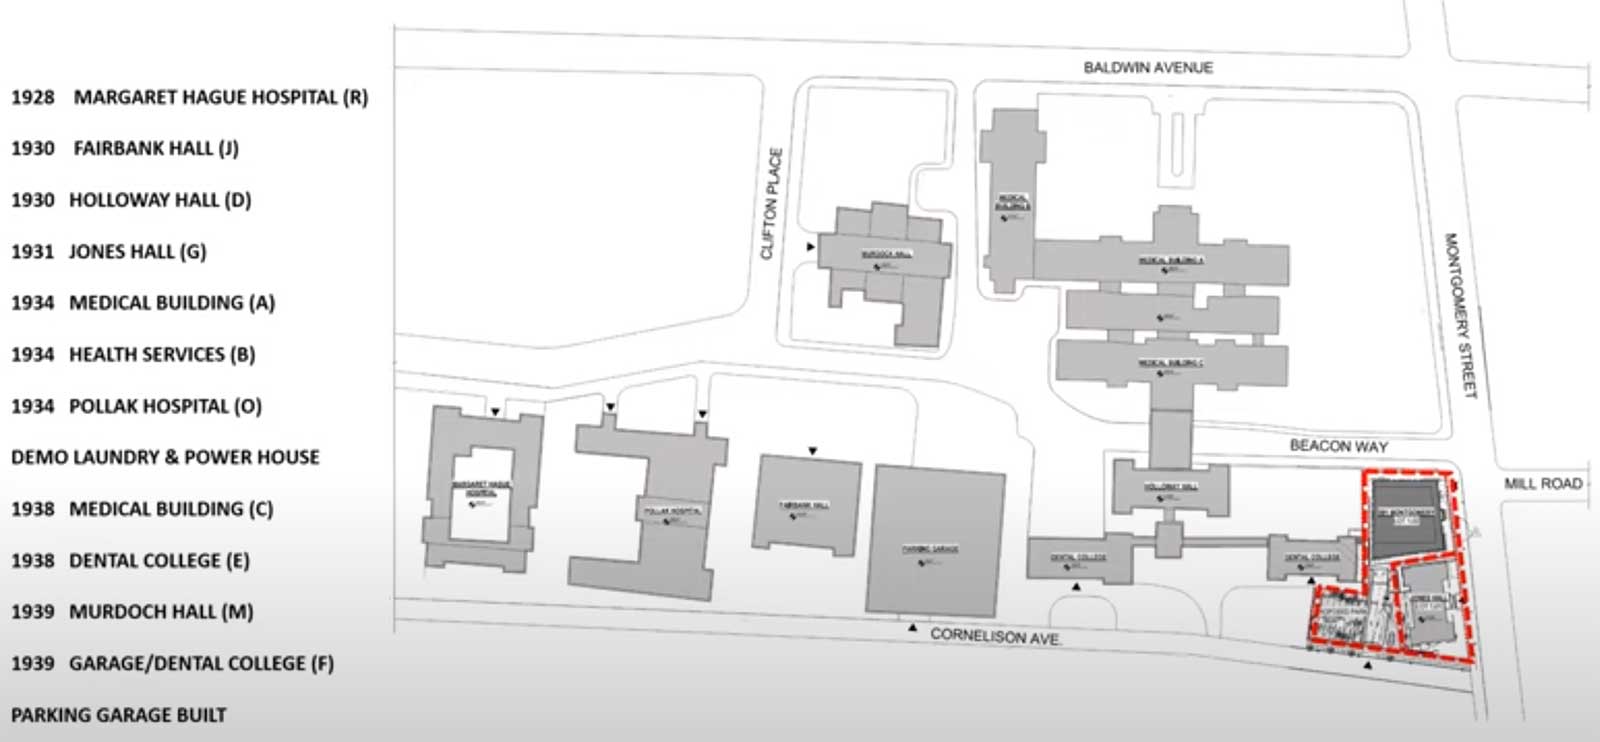 Beacon Tower 591 Montgomery St Jersey City Site Plan